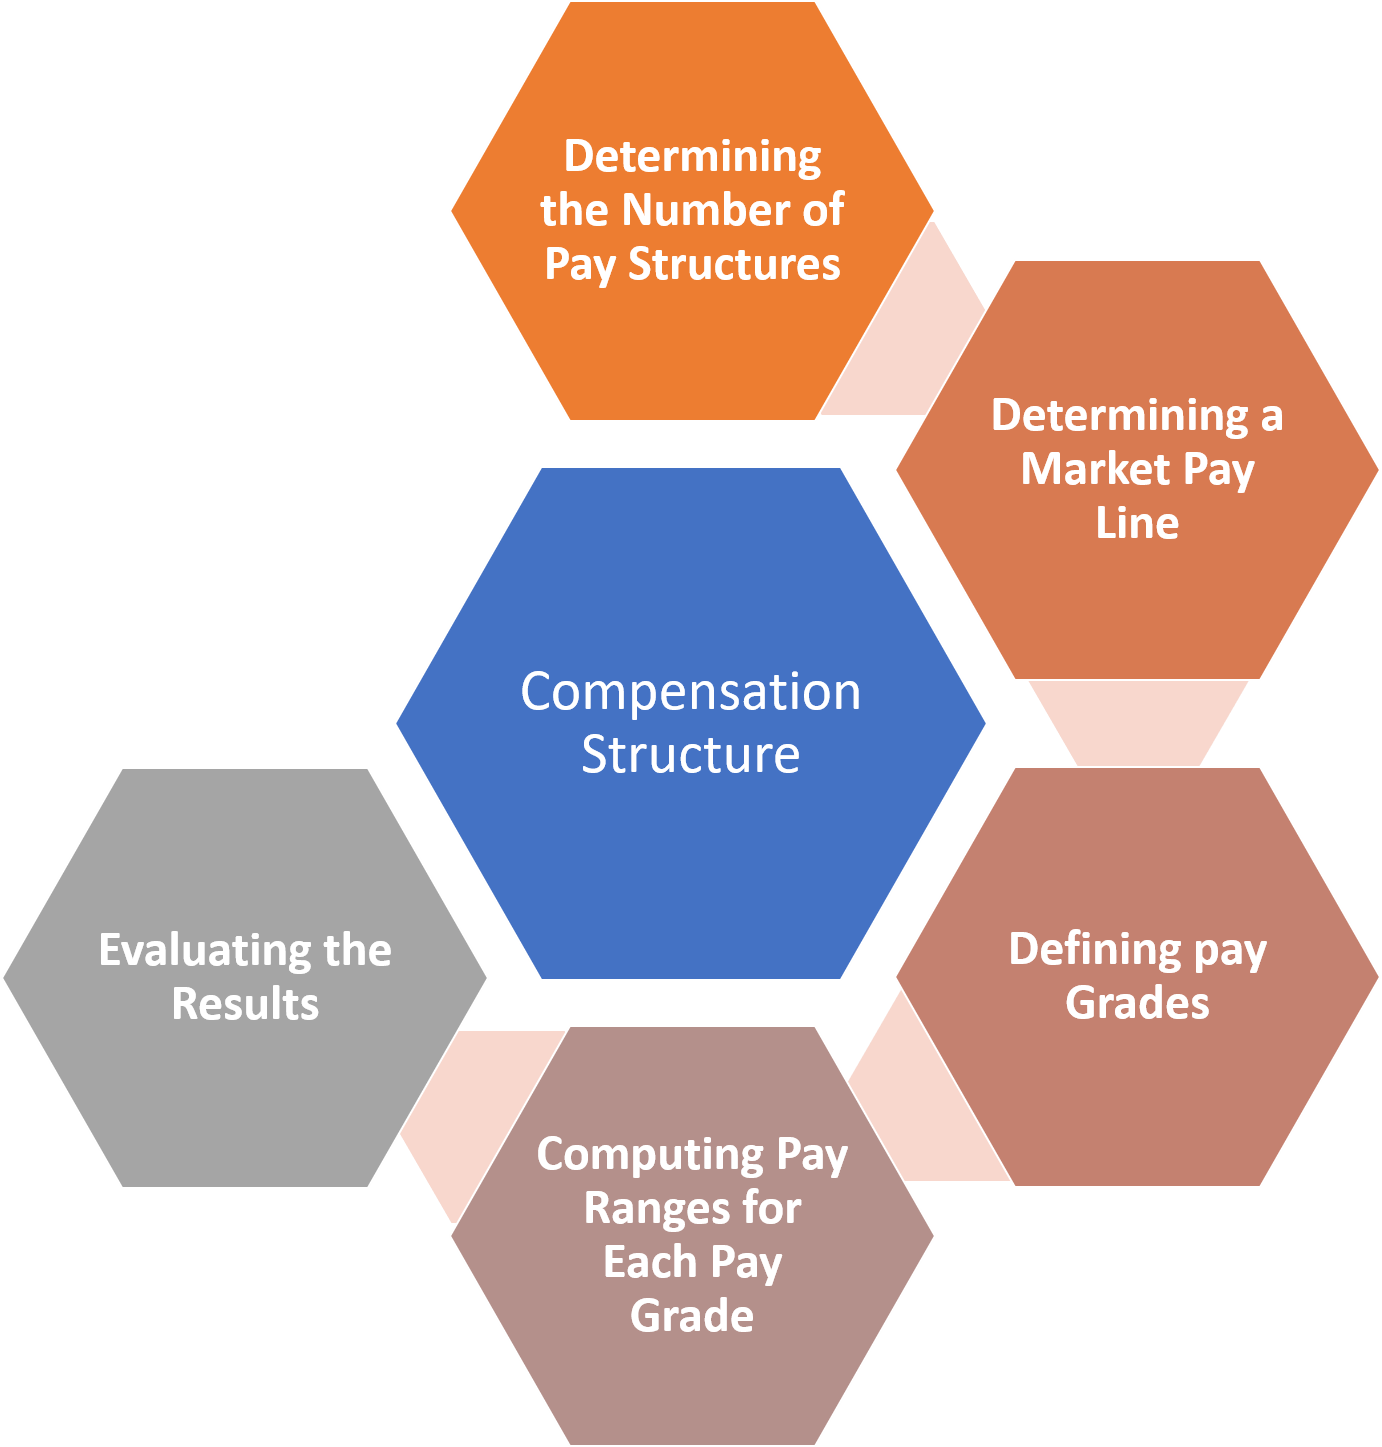 What is the Compensation Structure? ElectricalWorkbook